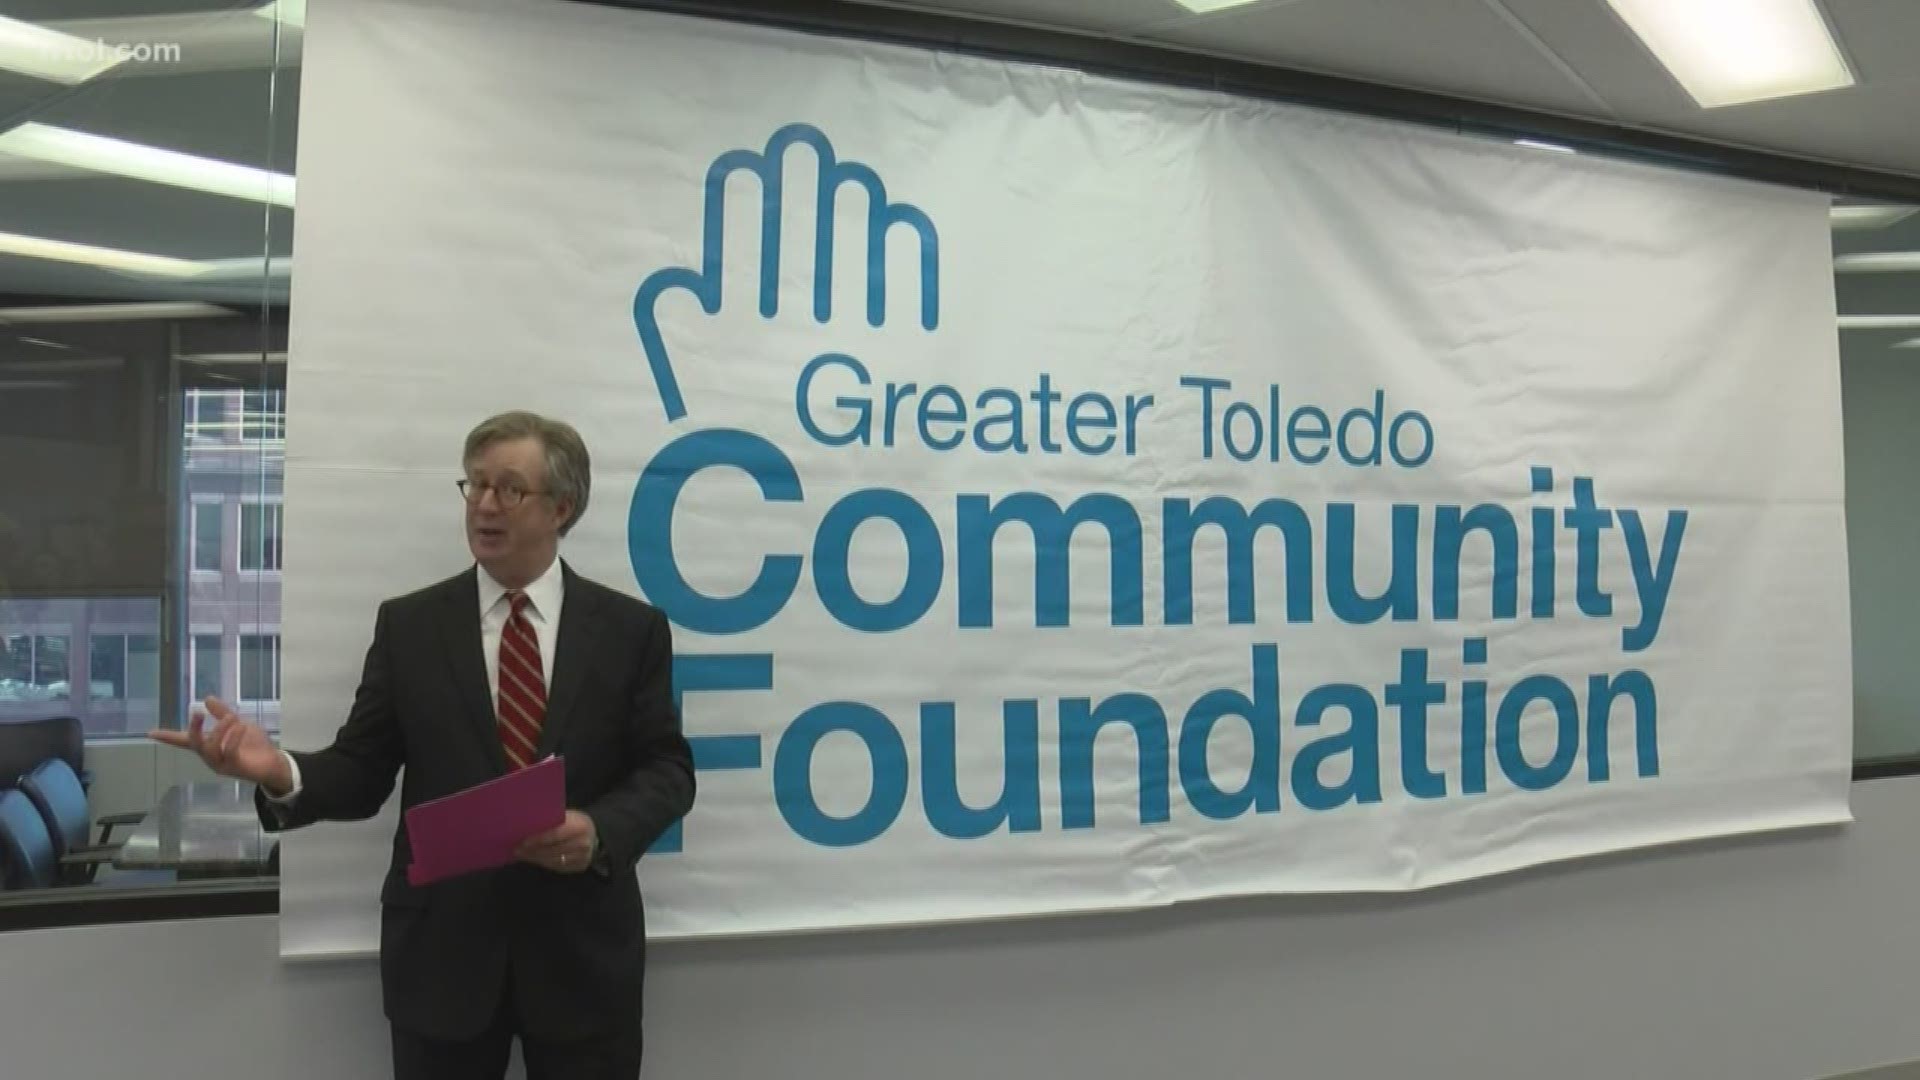 New logo and name reflect the organization's expanded mission.